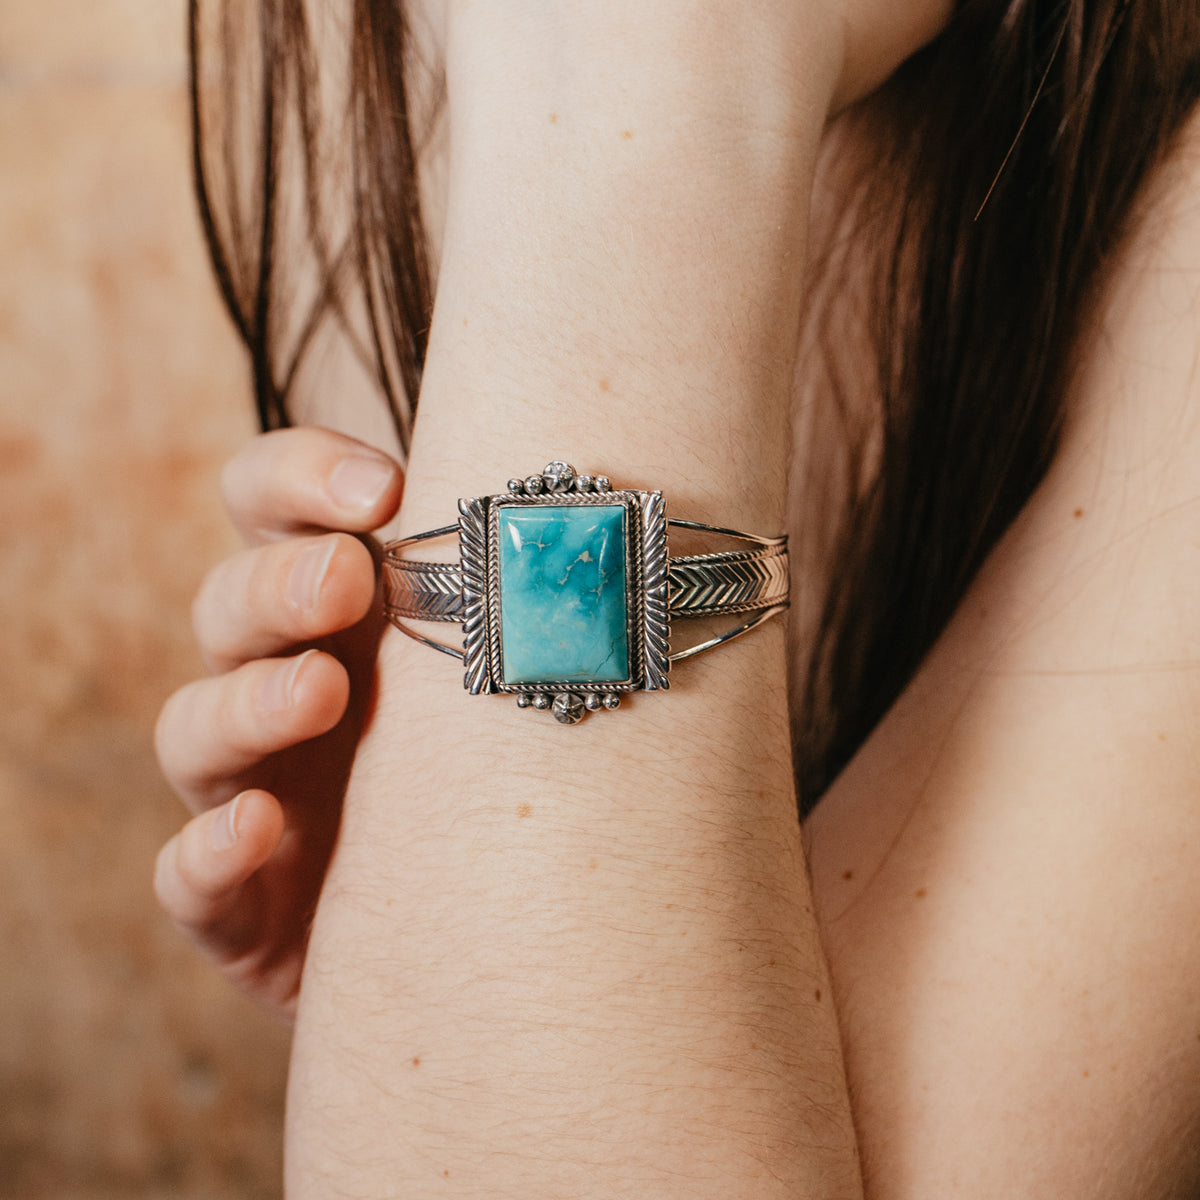 Turquoise and Sterling Silver Cuff Bracelet